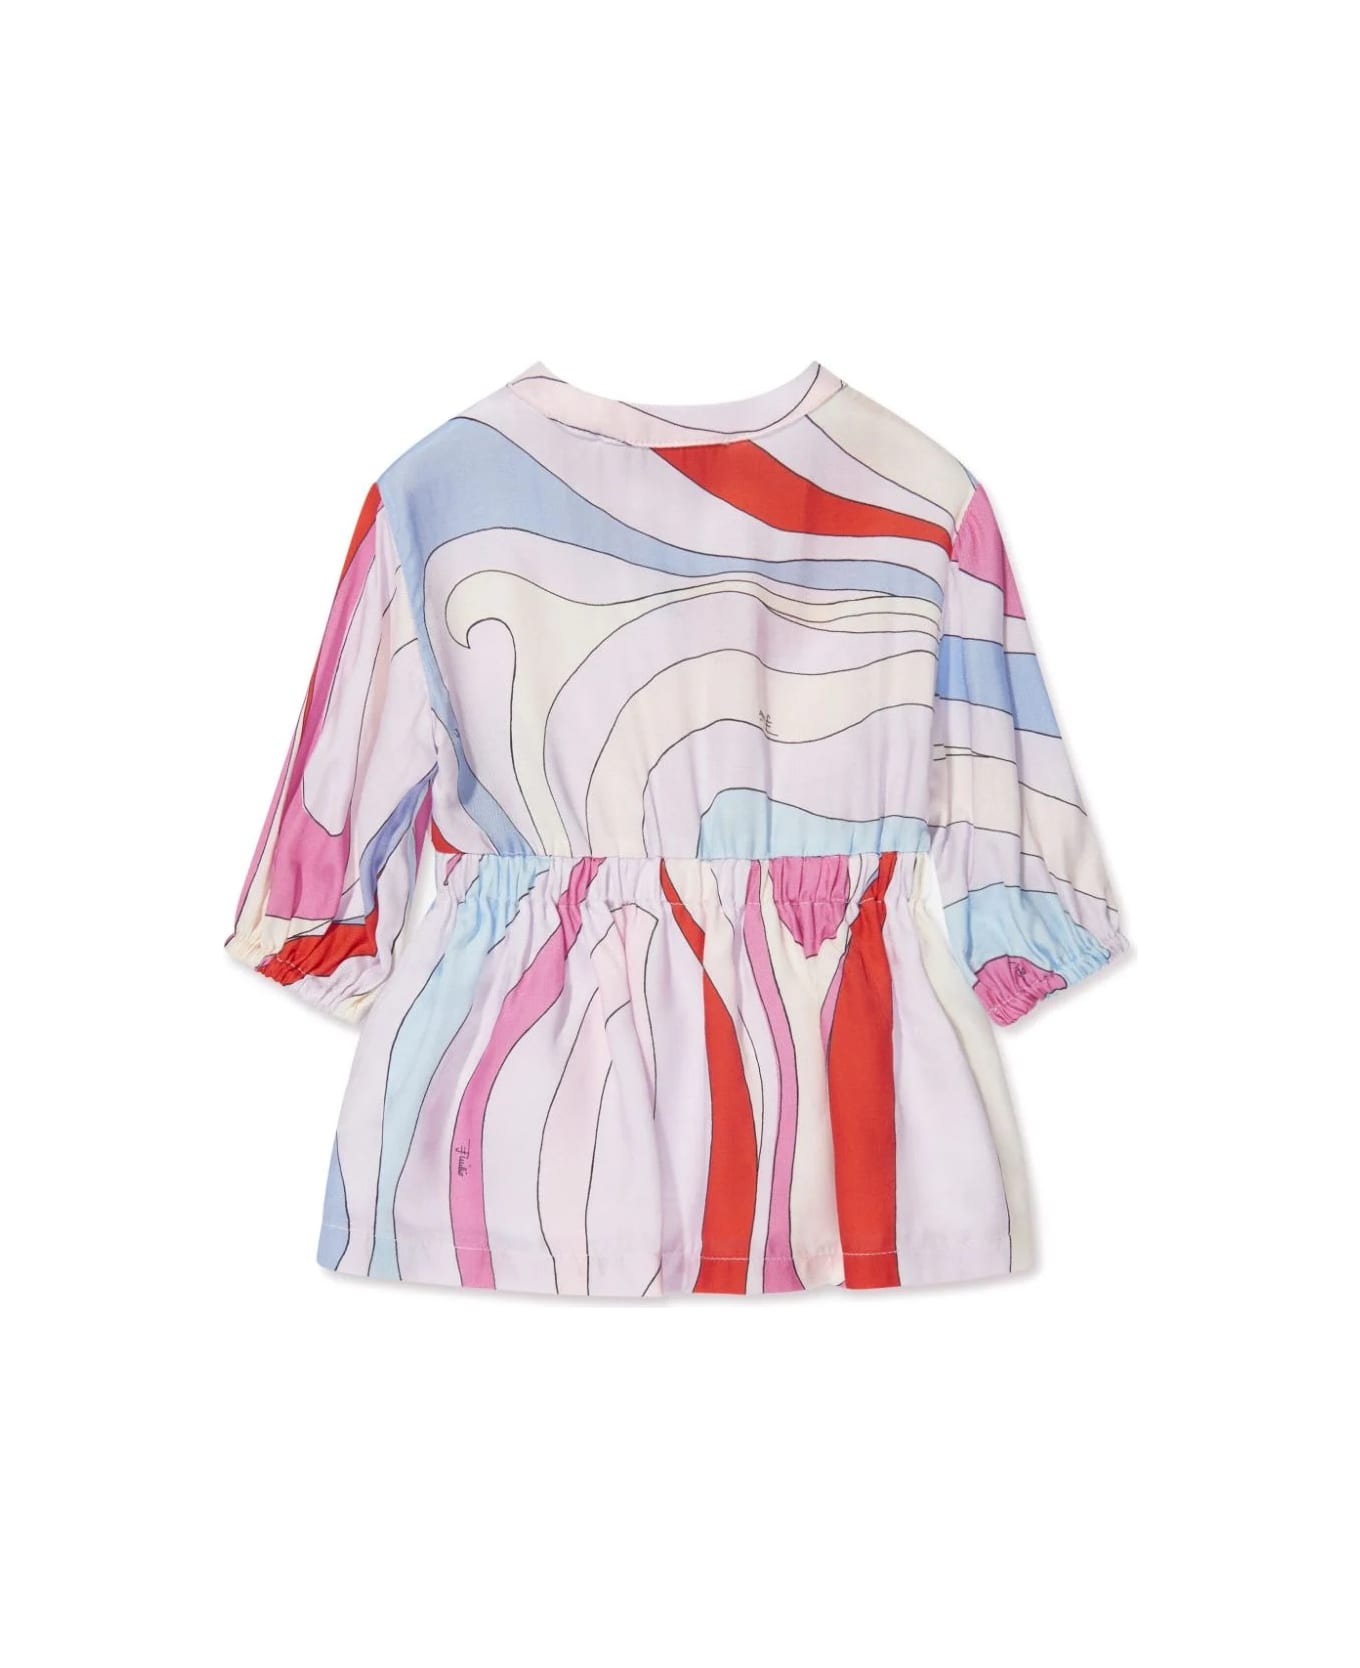 Pucci Shirt Dress With Iride Print In Light Blue/multicolour - Blue